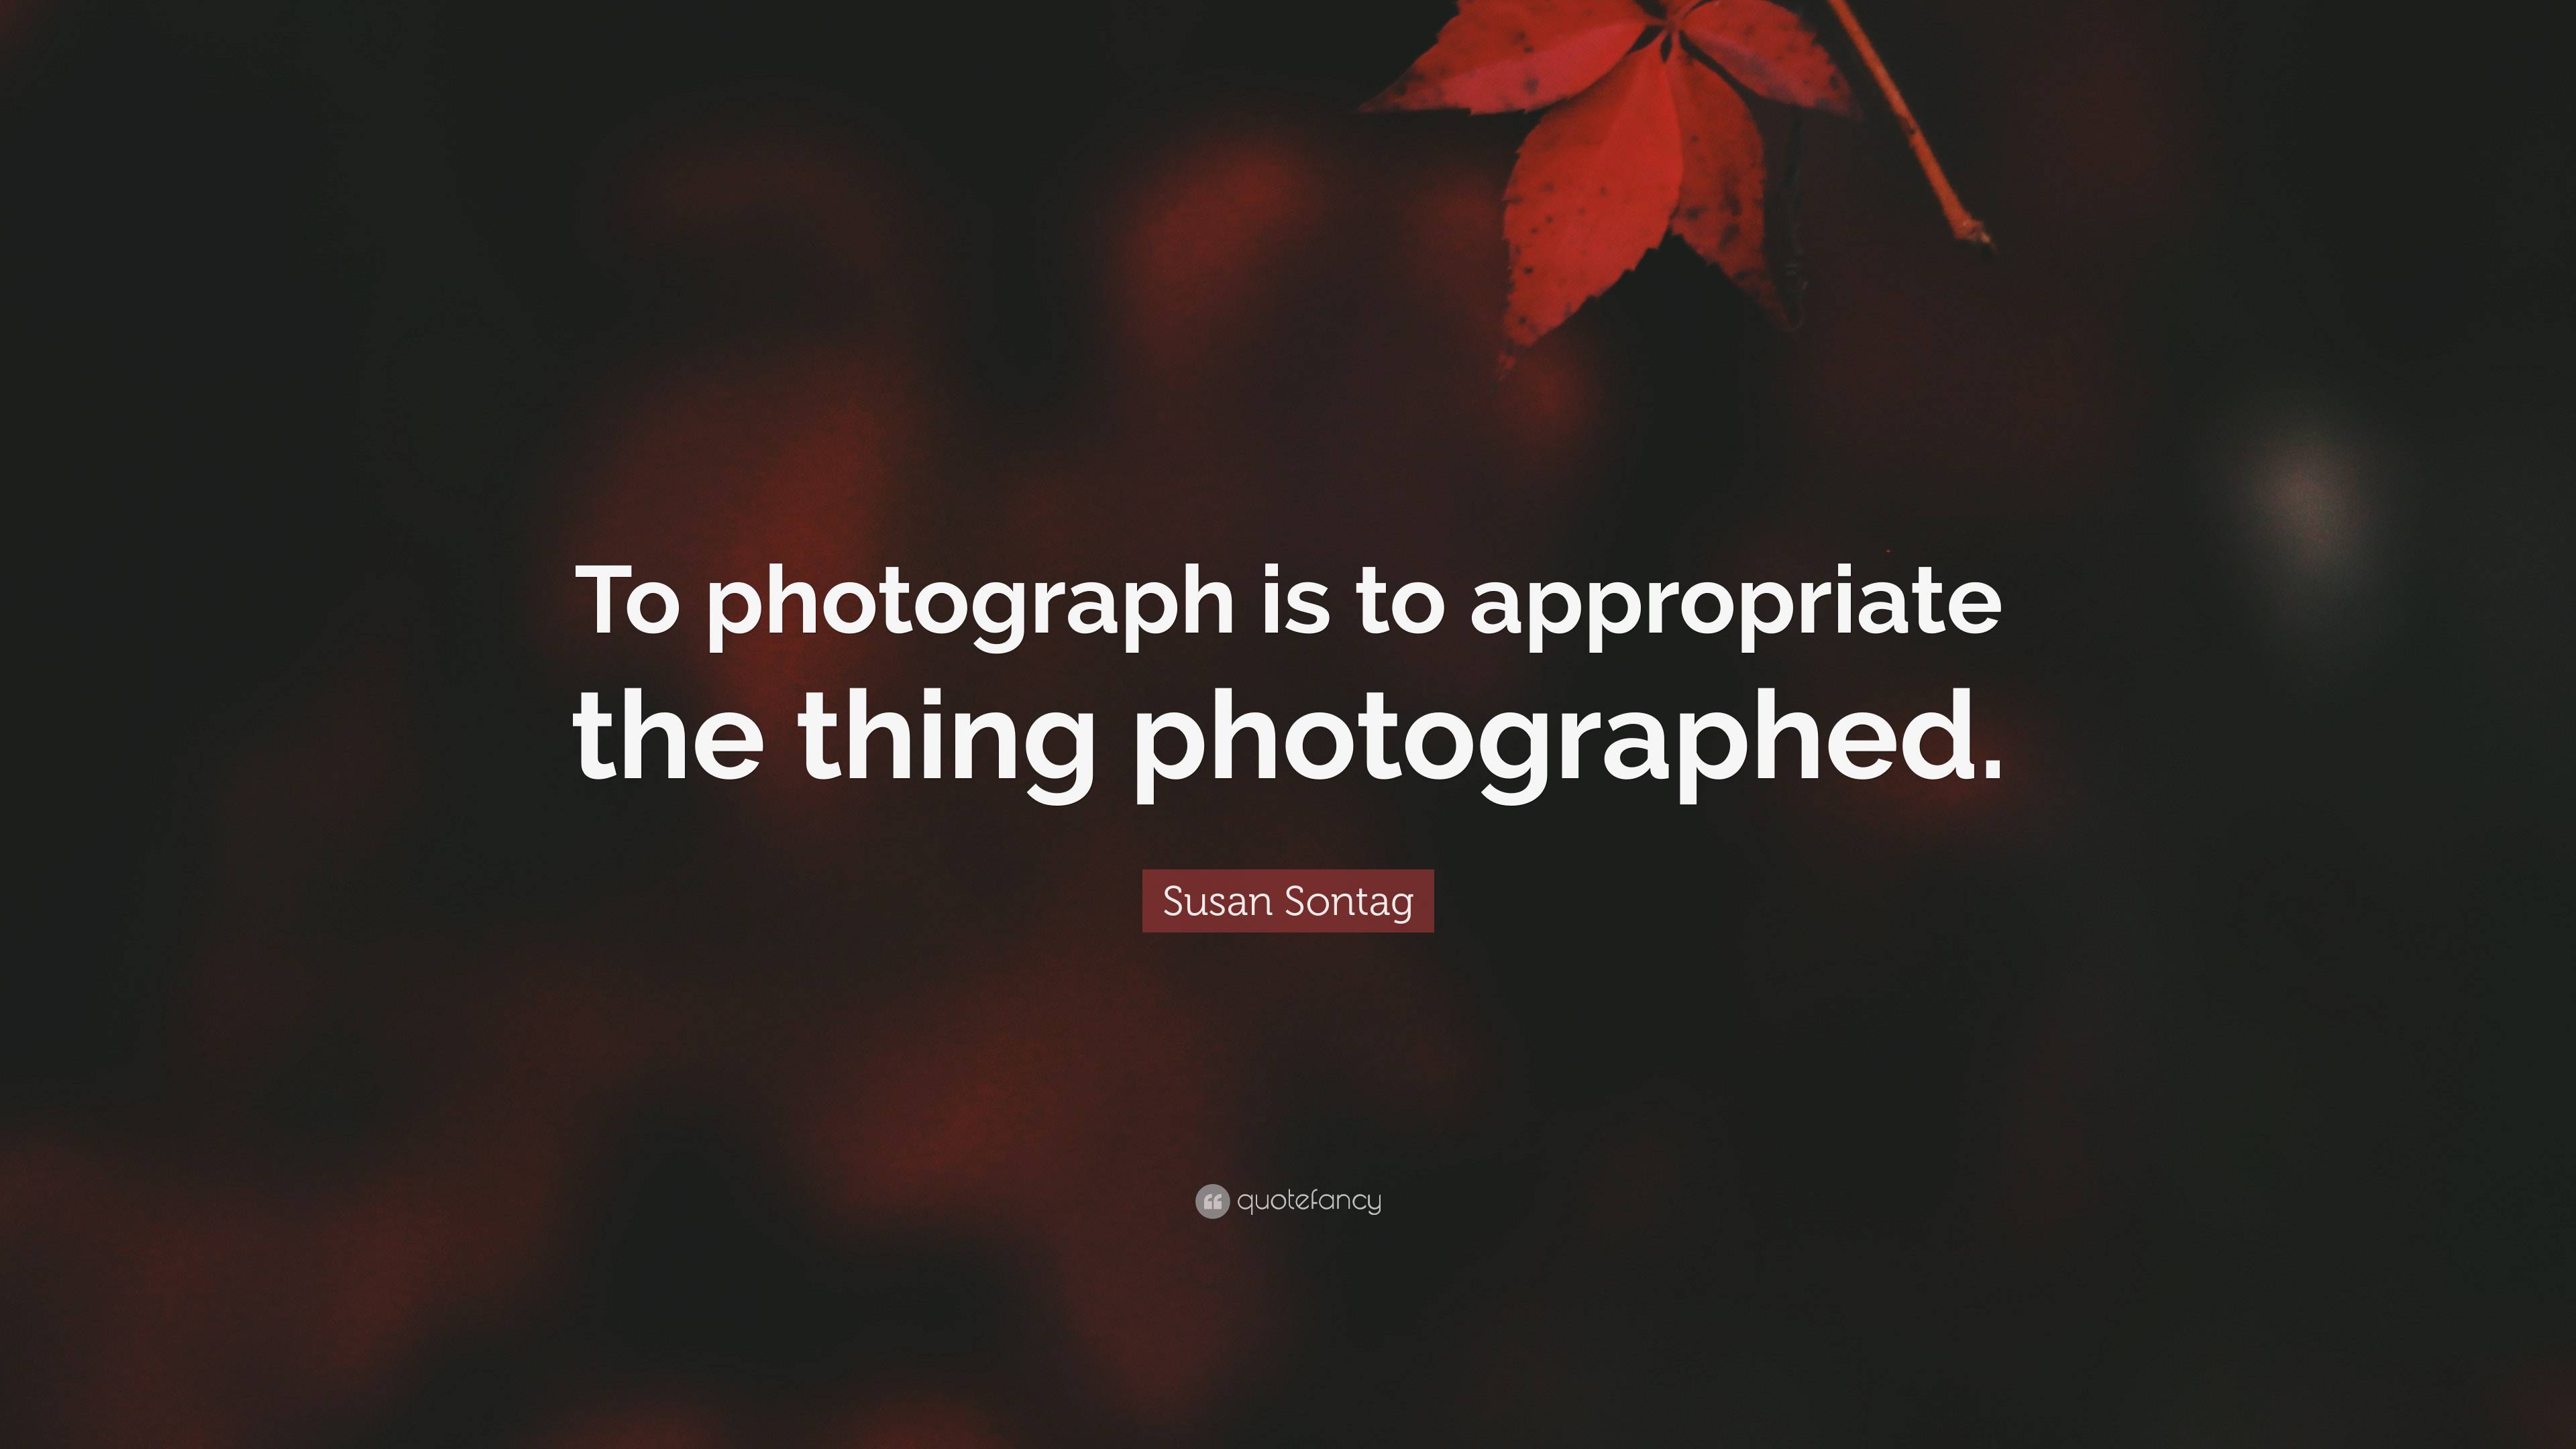 Susan Sontag Quote: “To photograph is to appropriate the thing photographed.” (2 wallpaper)